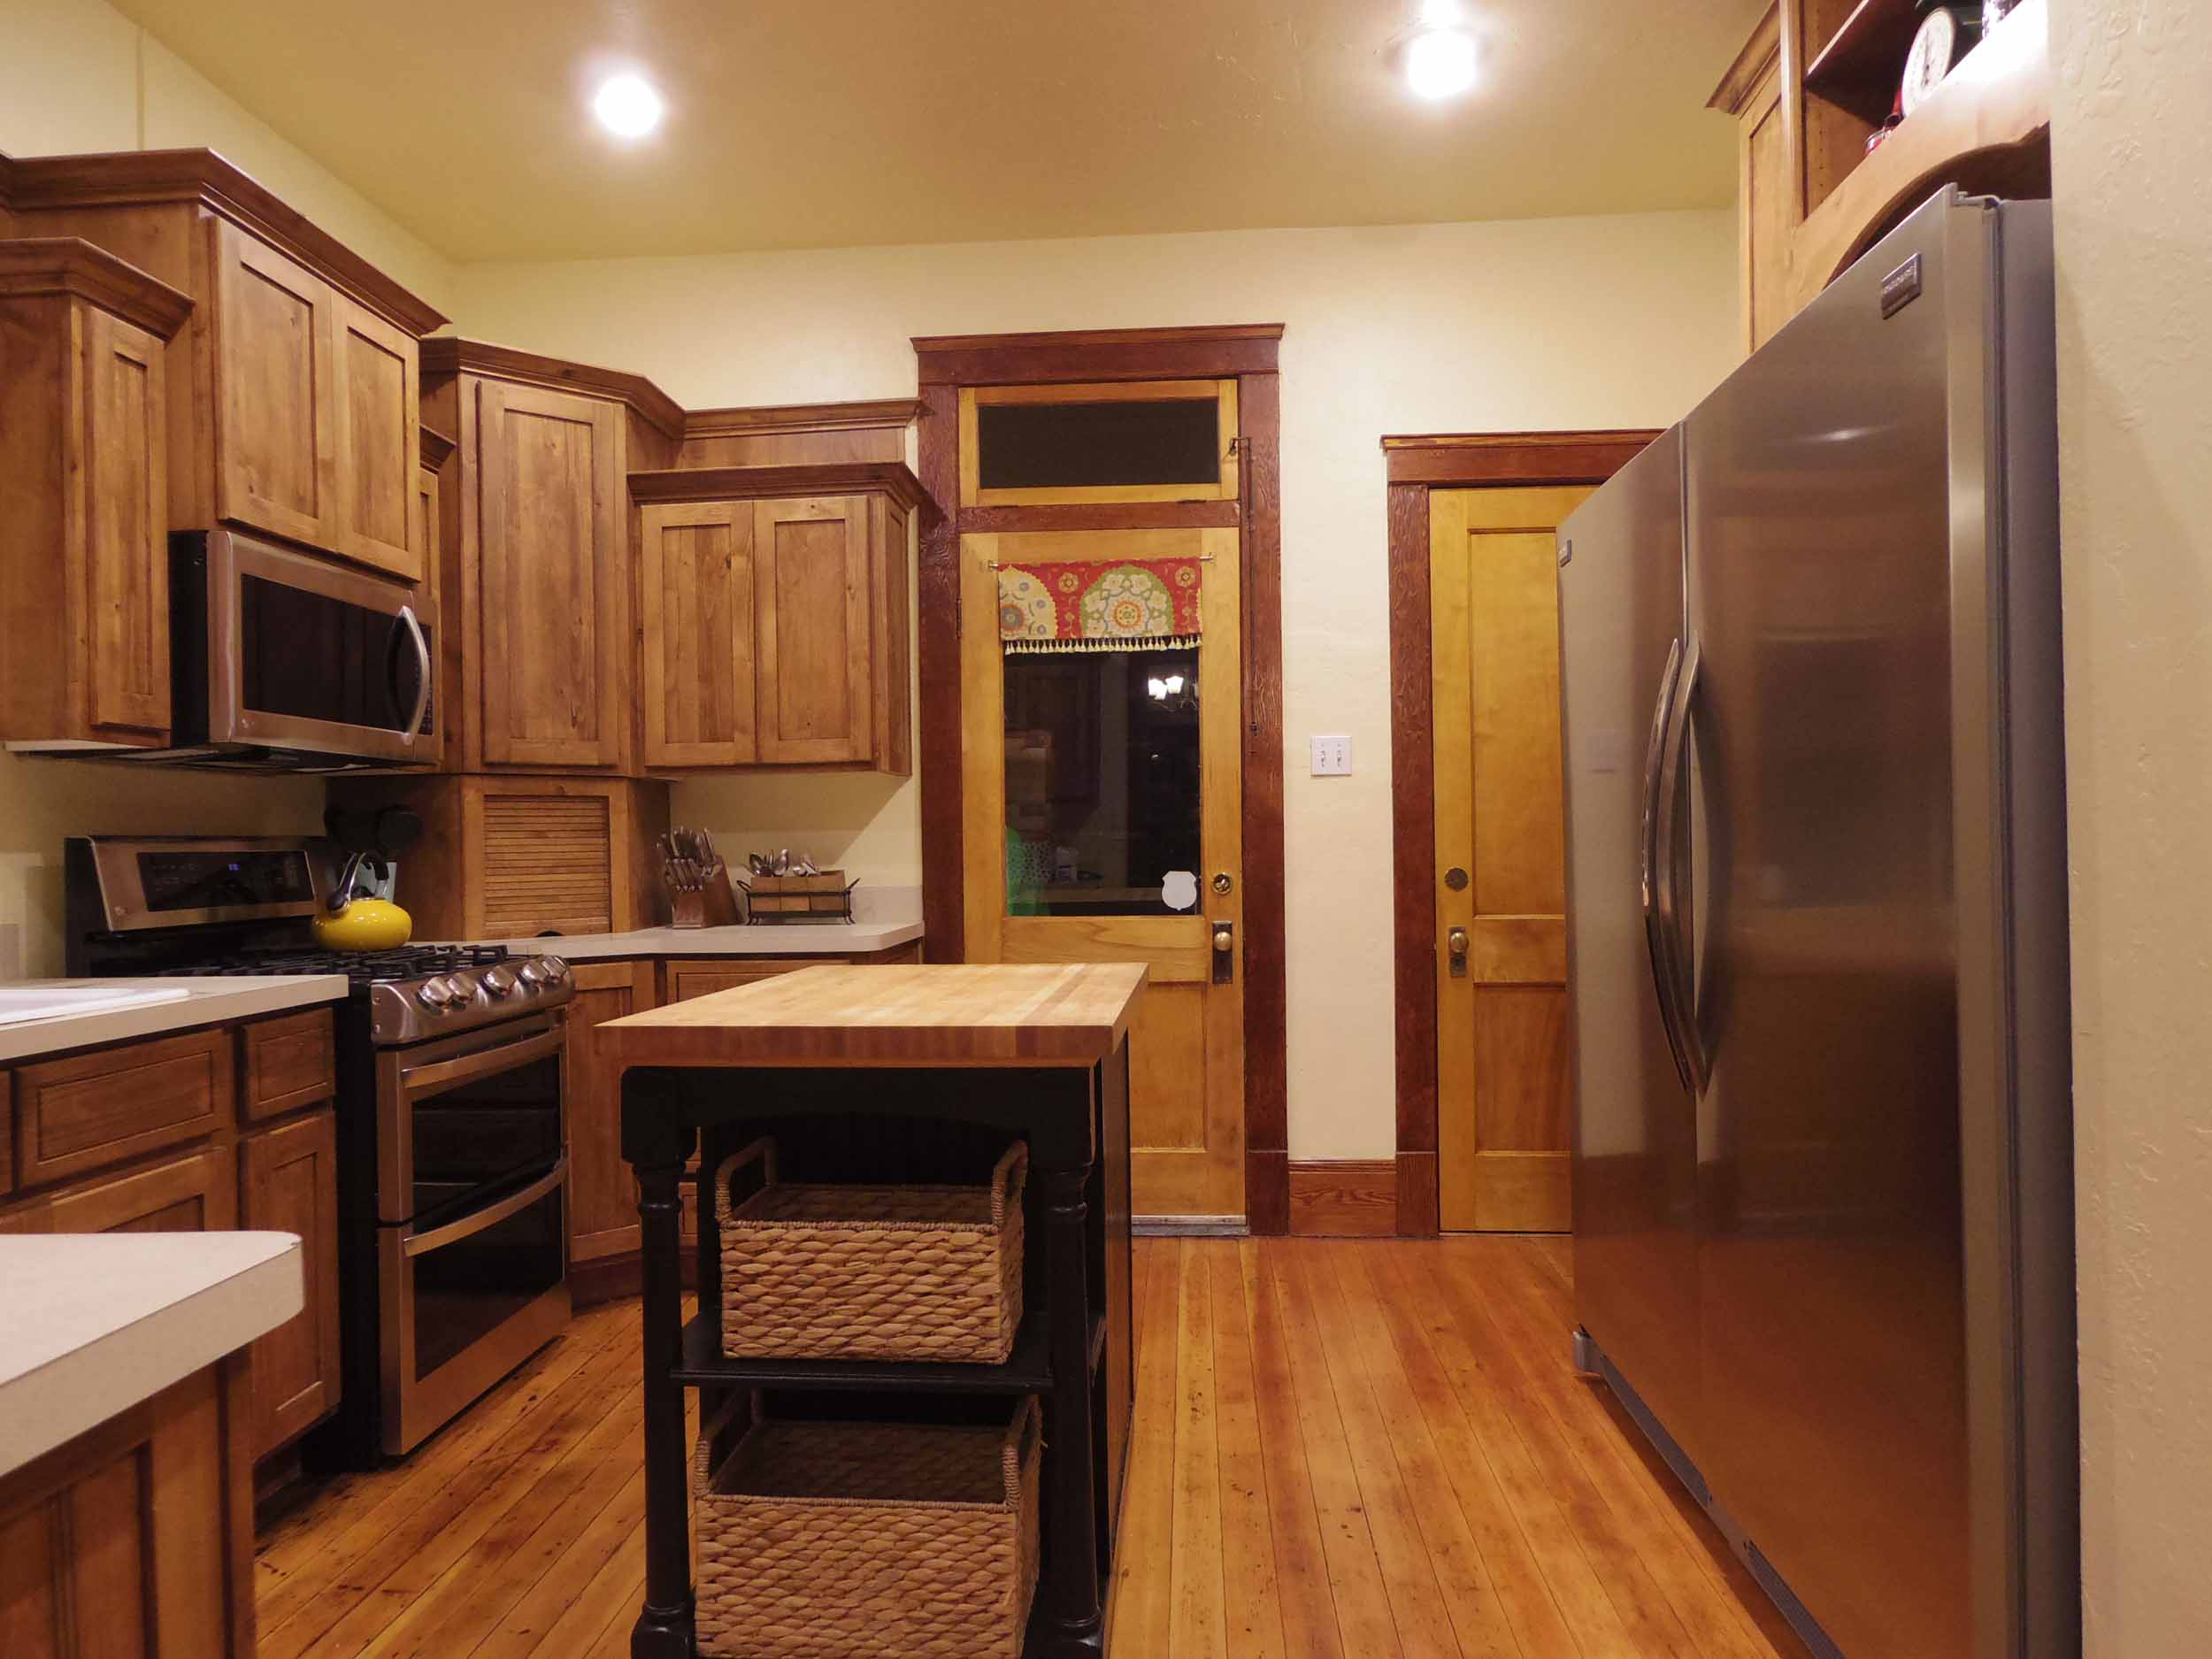 VIDEO:  MY OLD HOUSE – Ep. 4 – Classic Craftsman Kitchen Remodel